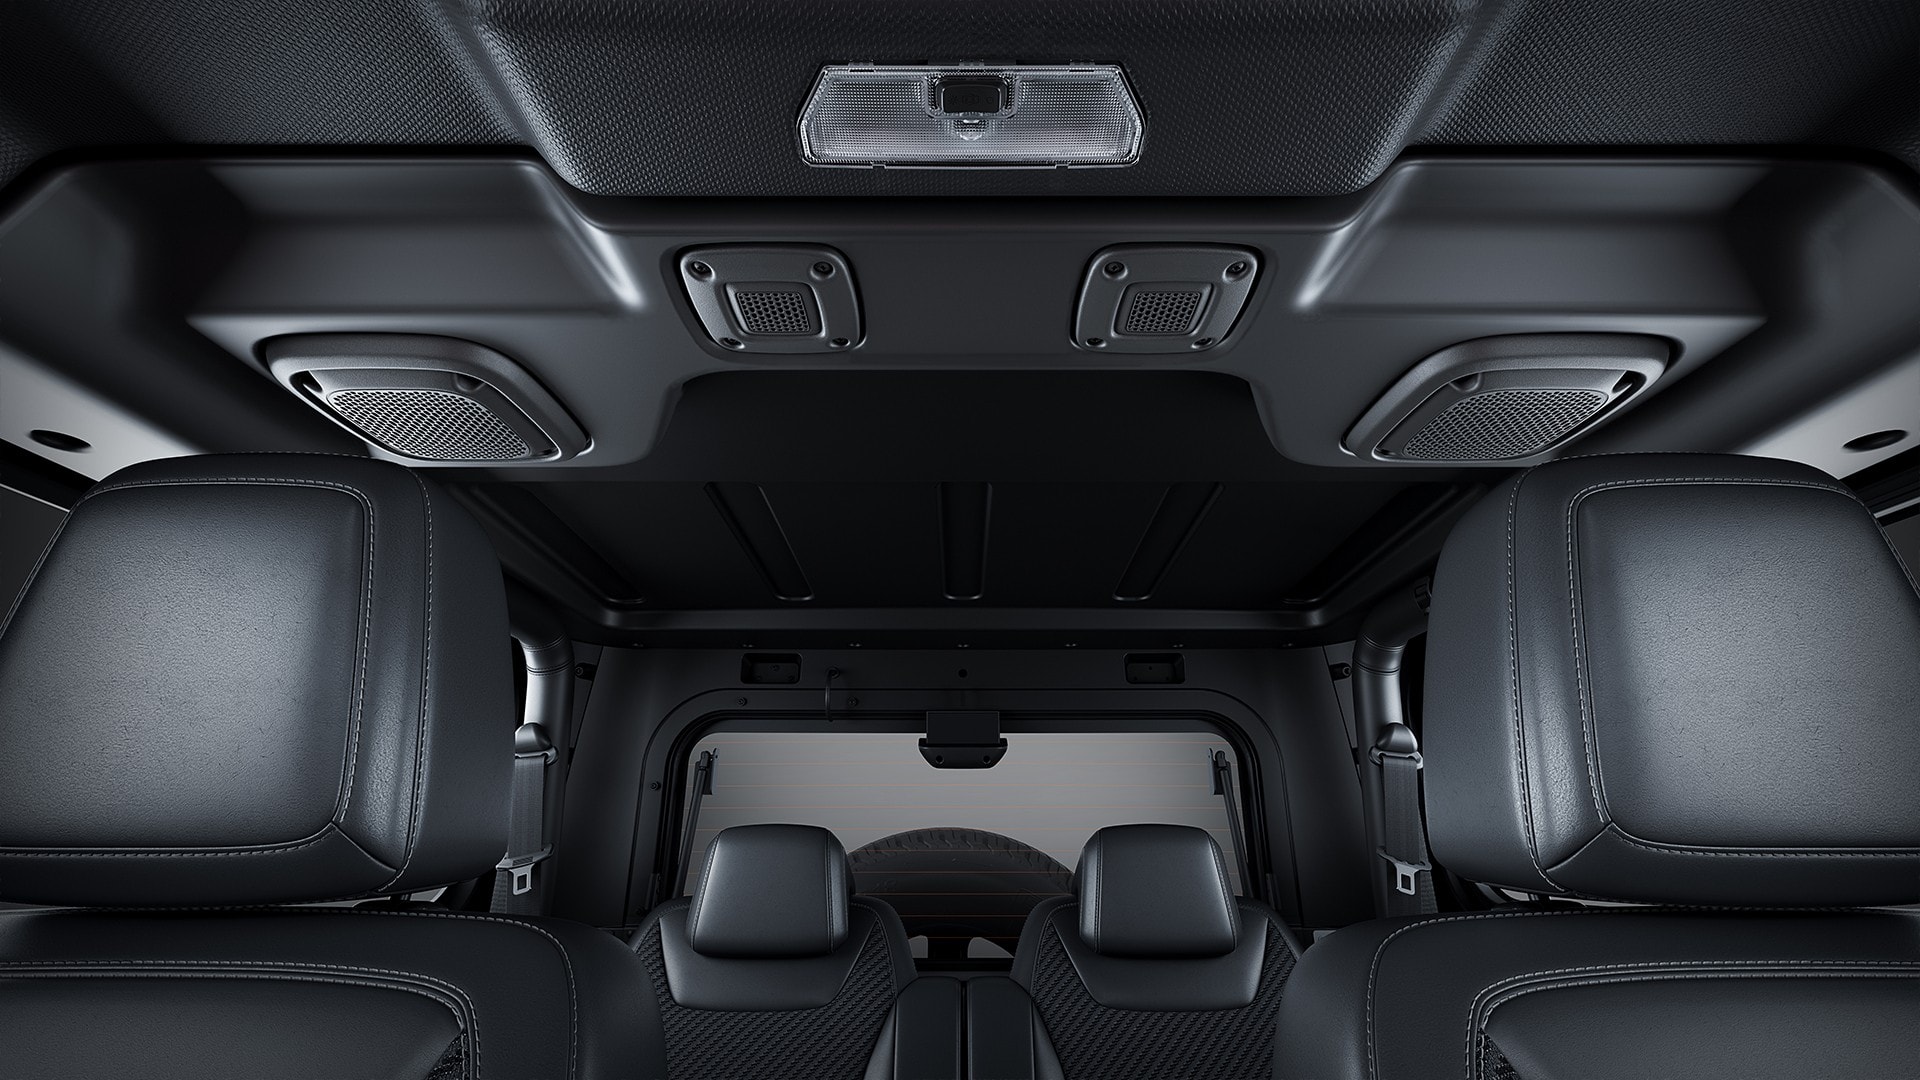 thar interior roof with speakers